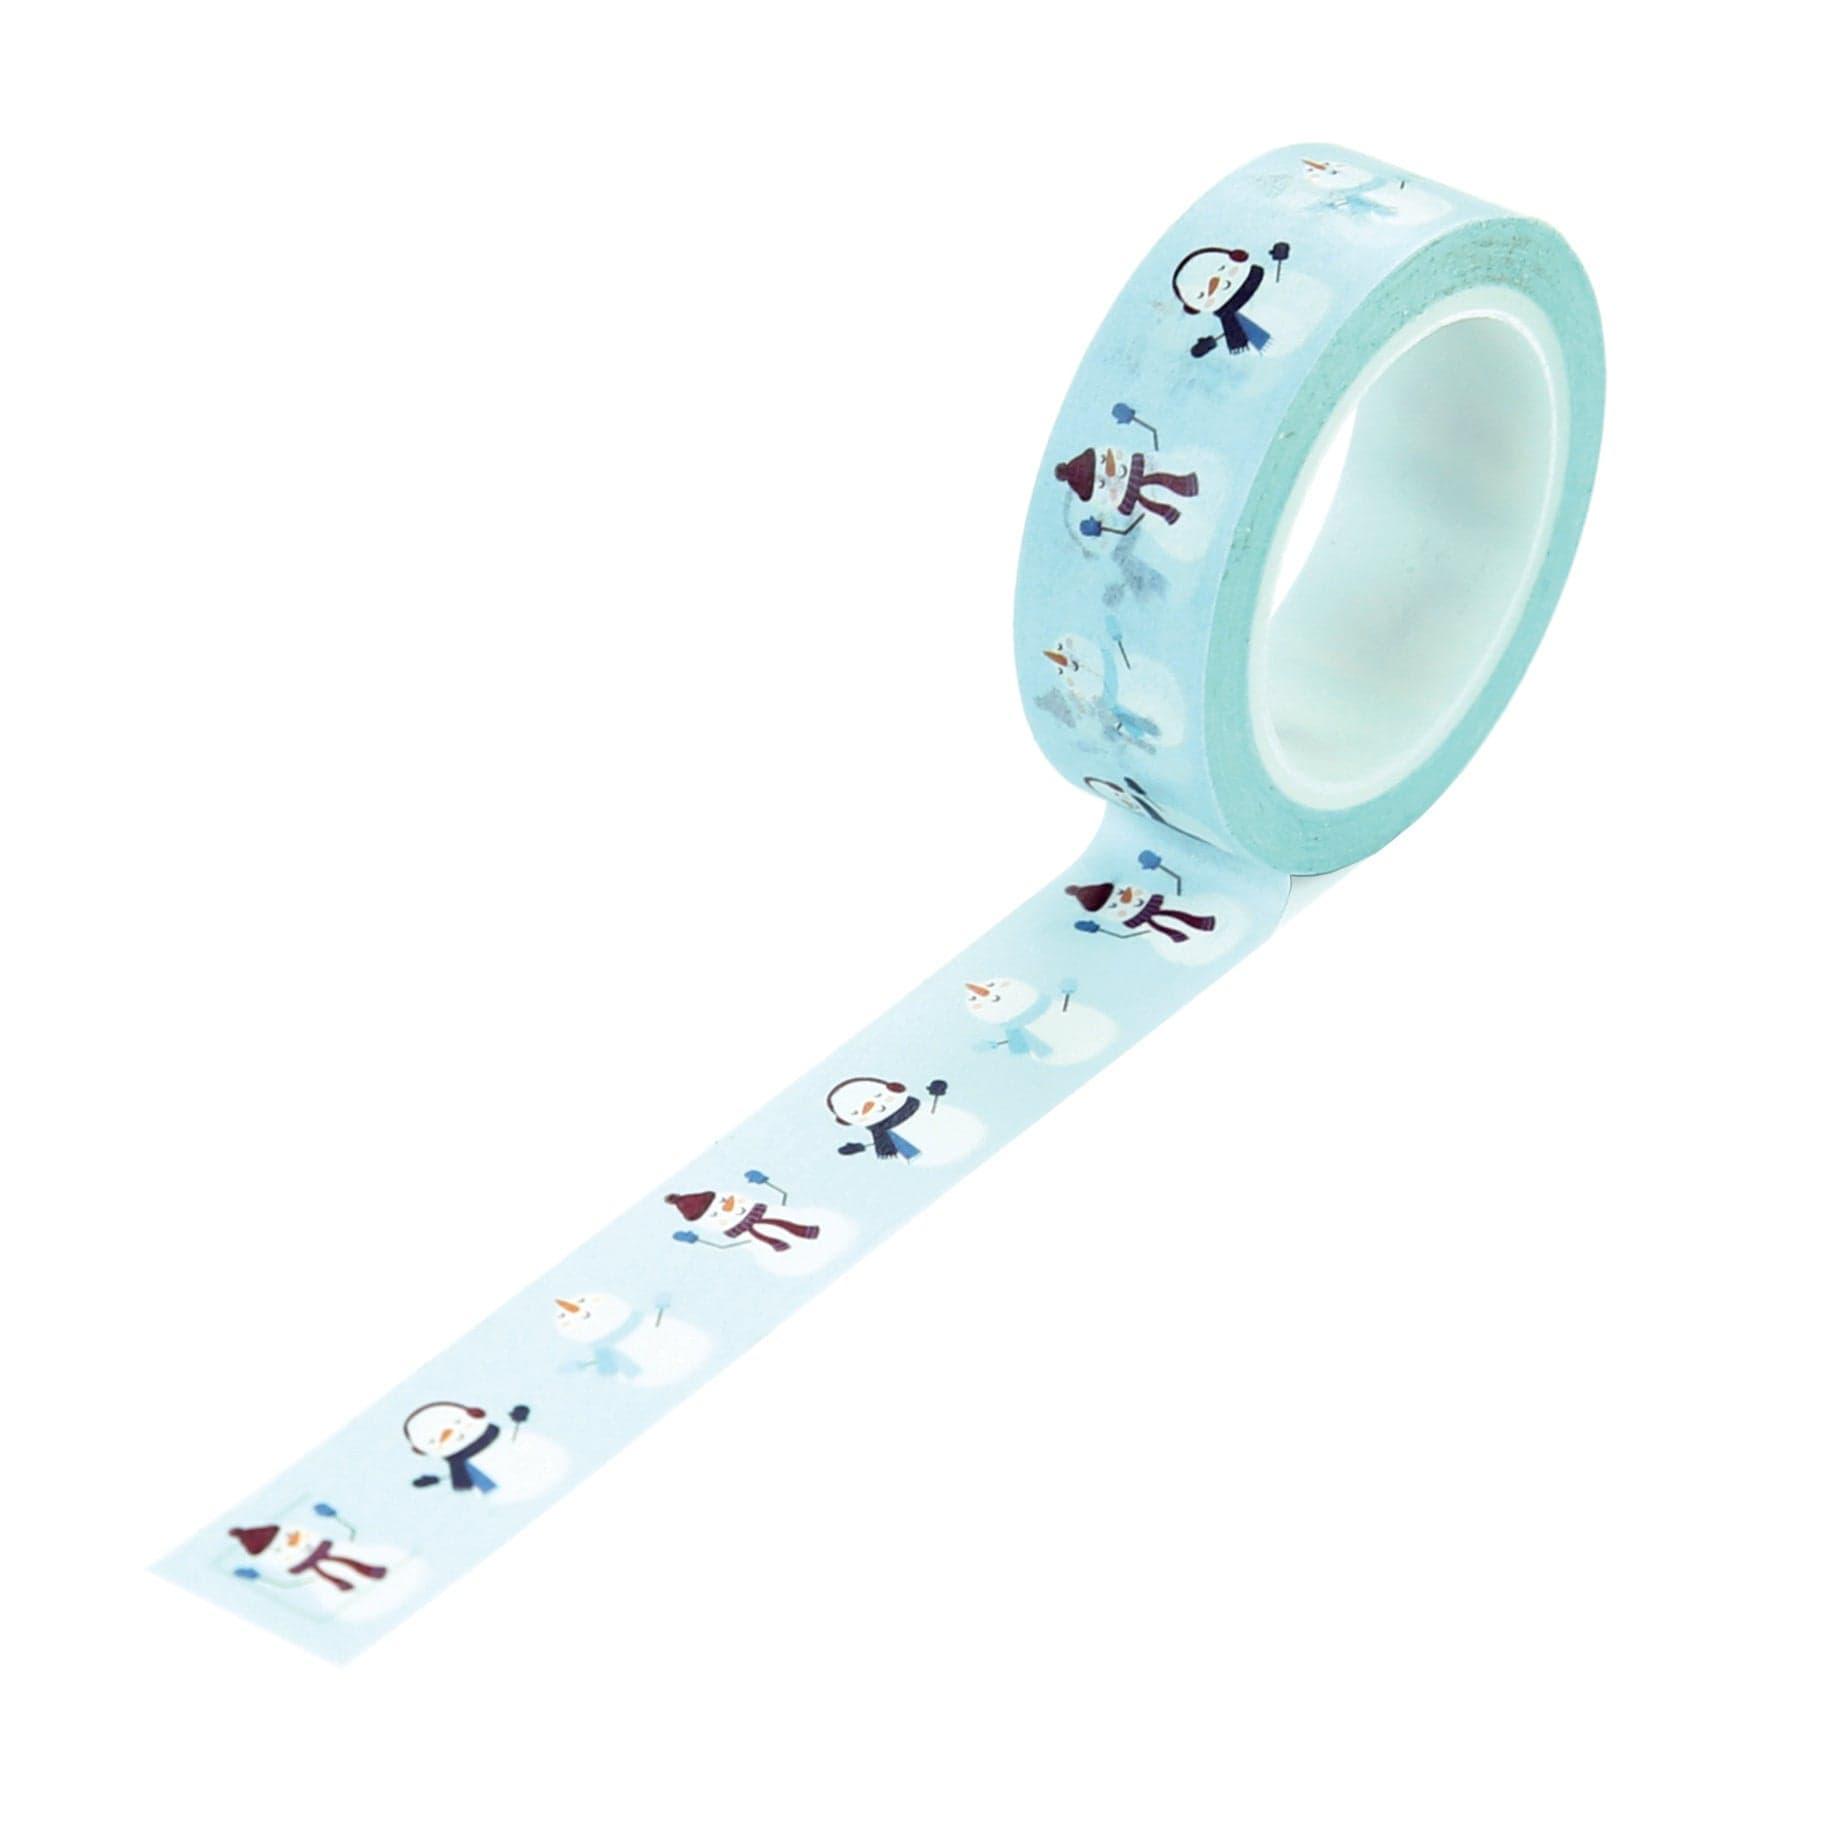 My Favorite Winter Collection Sweet Snowman Washi Tape by Echo Park Paper - Scrapbook Supply Companies